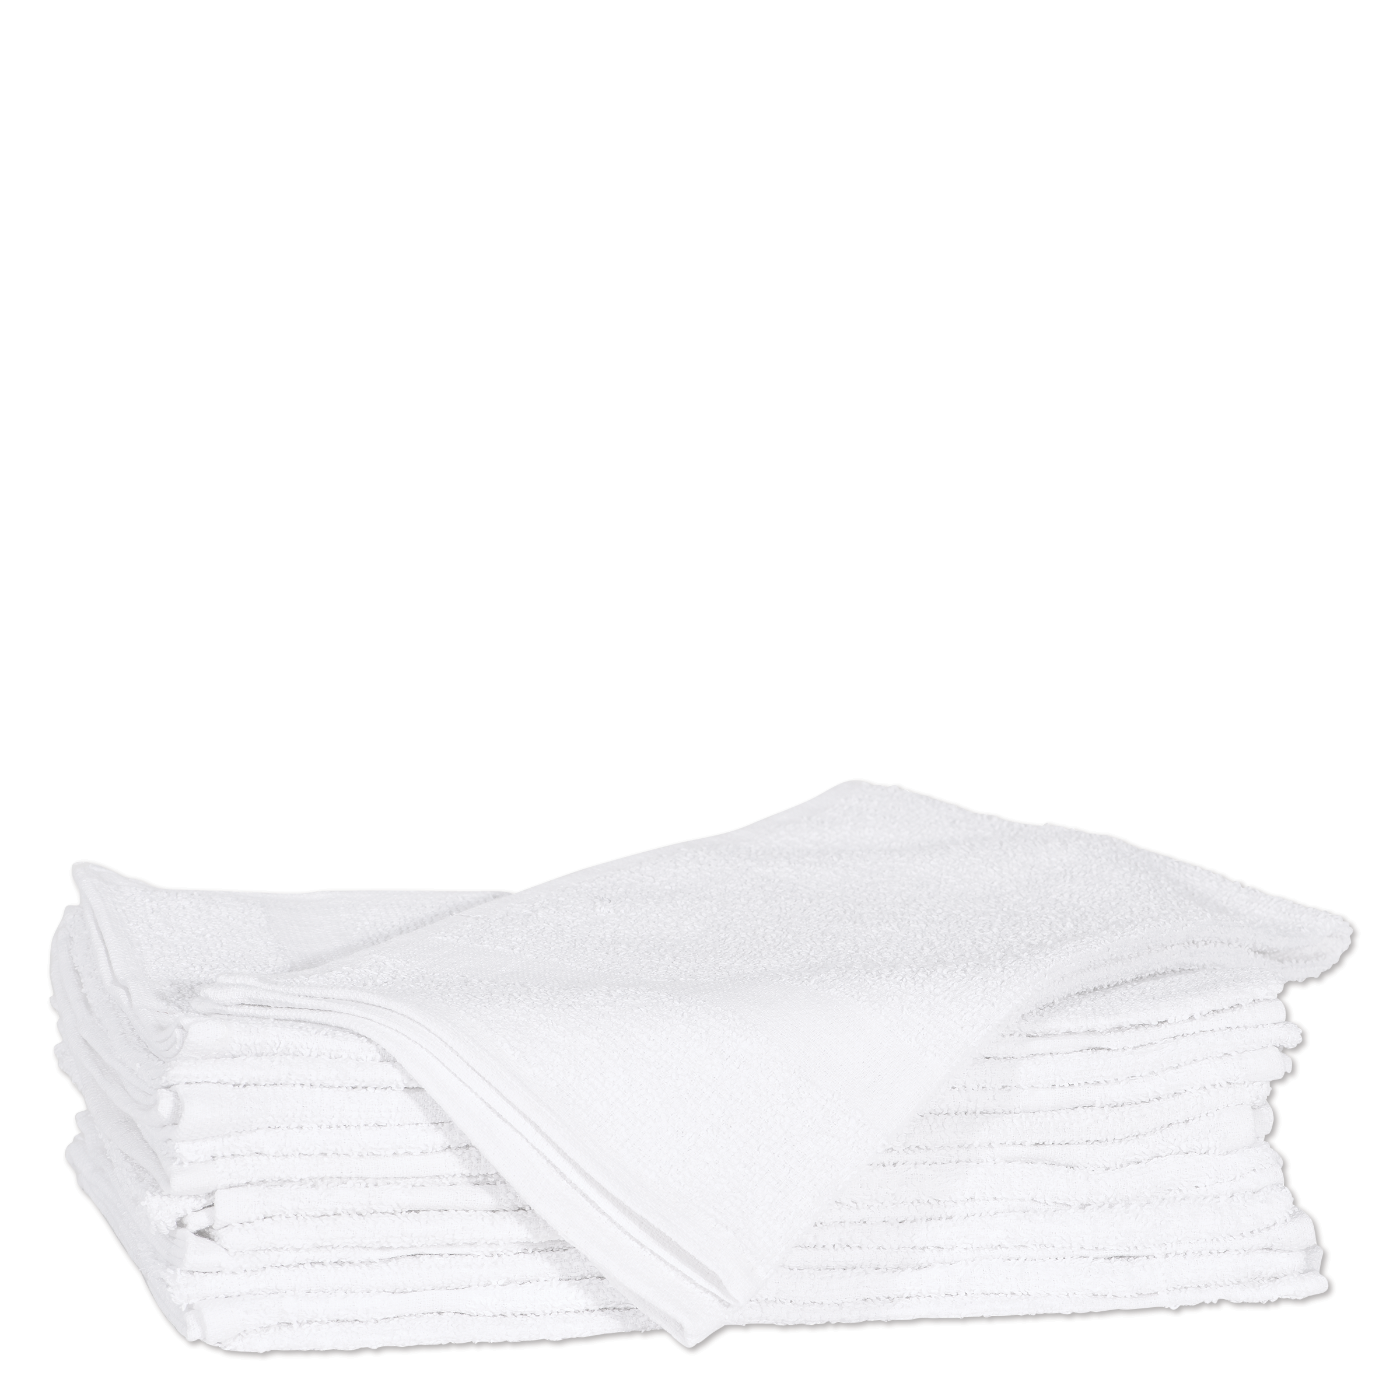 Cotton Towels, 16" x 27", 3 lbs. - White